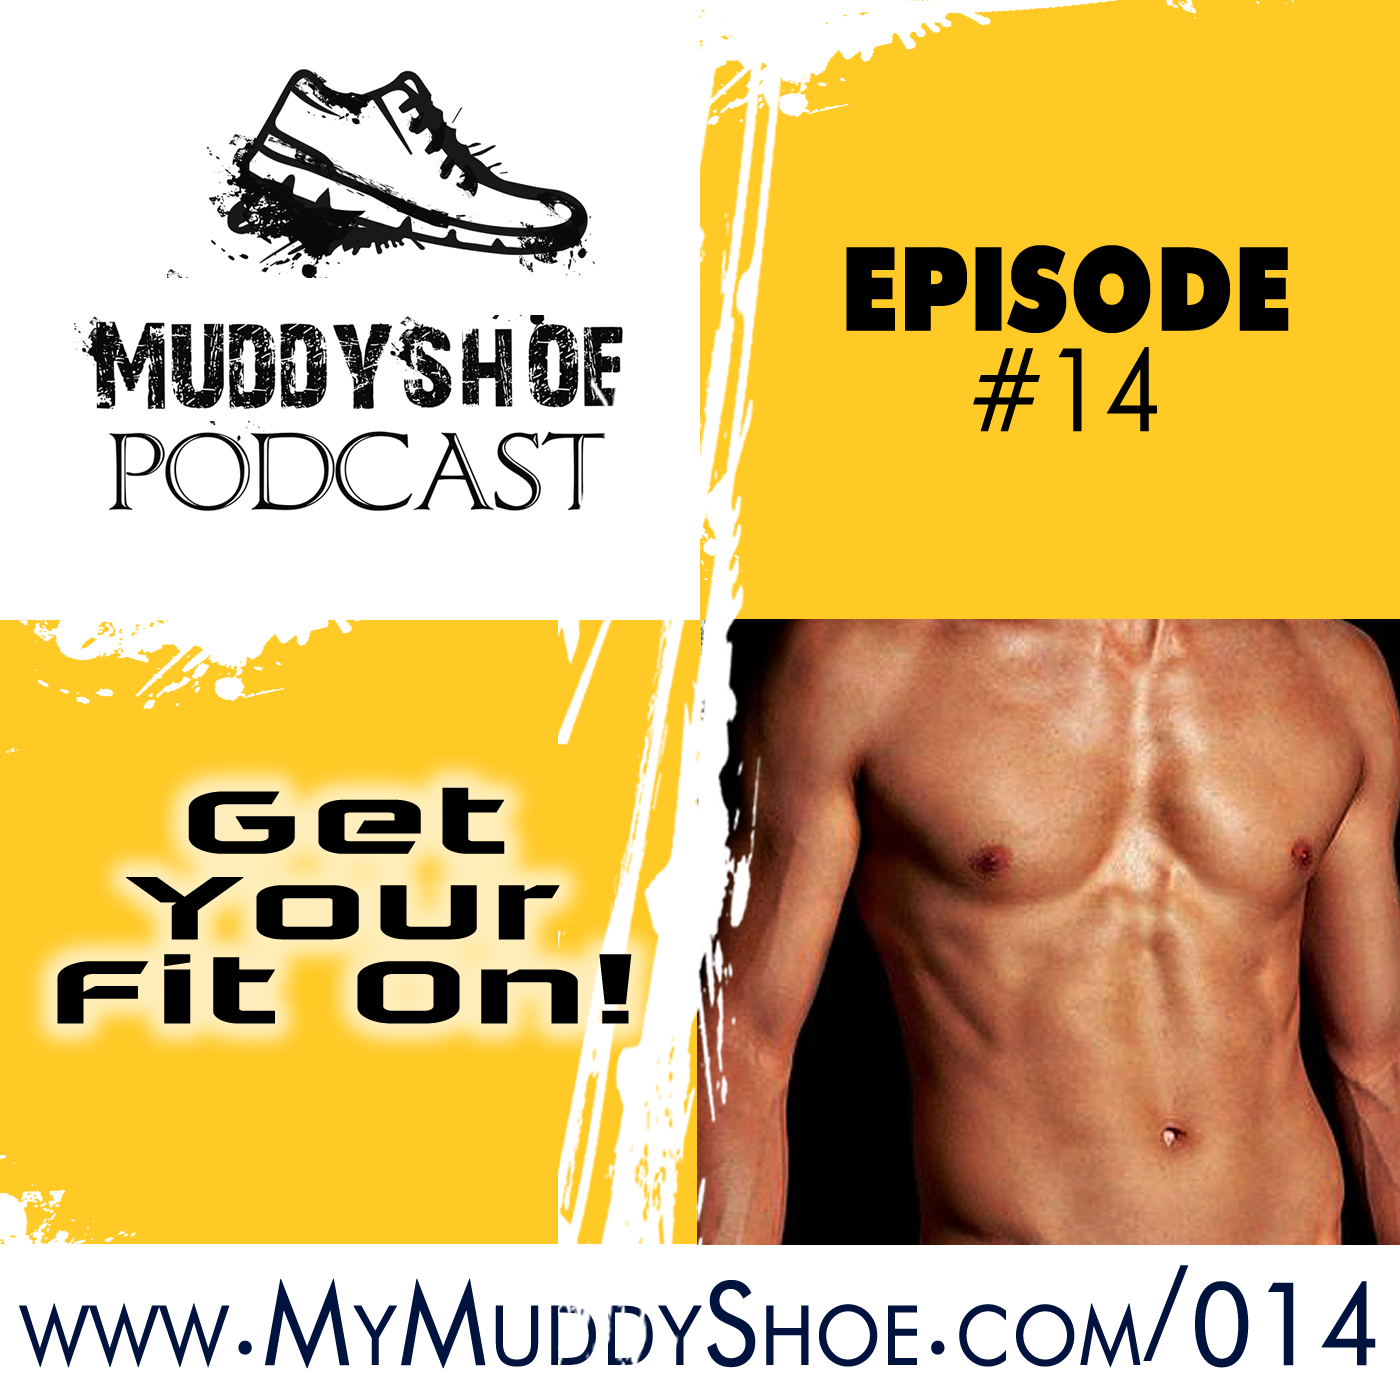 The Muddy Shoe #14 - Get Your Fit On With This 8 Week Full Body Functional Workout!